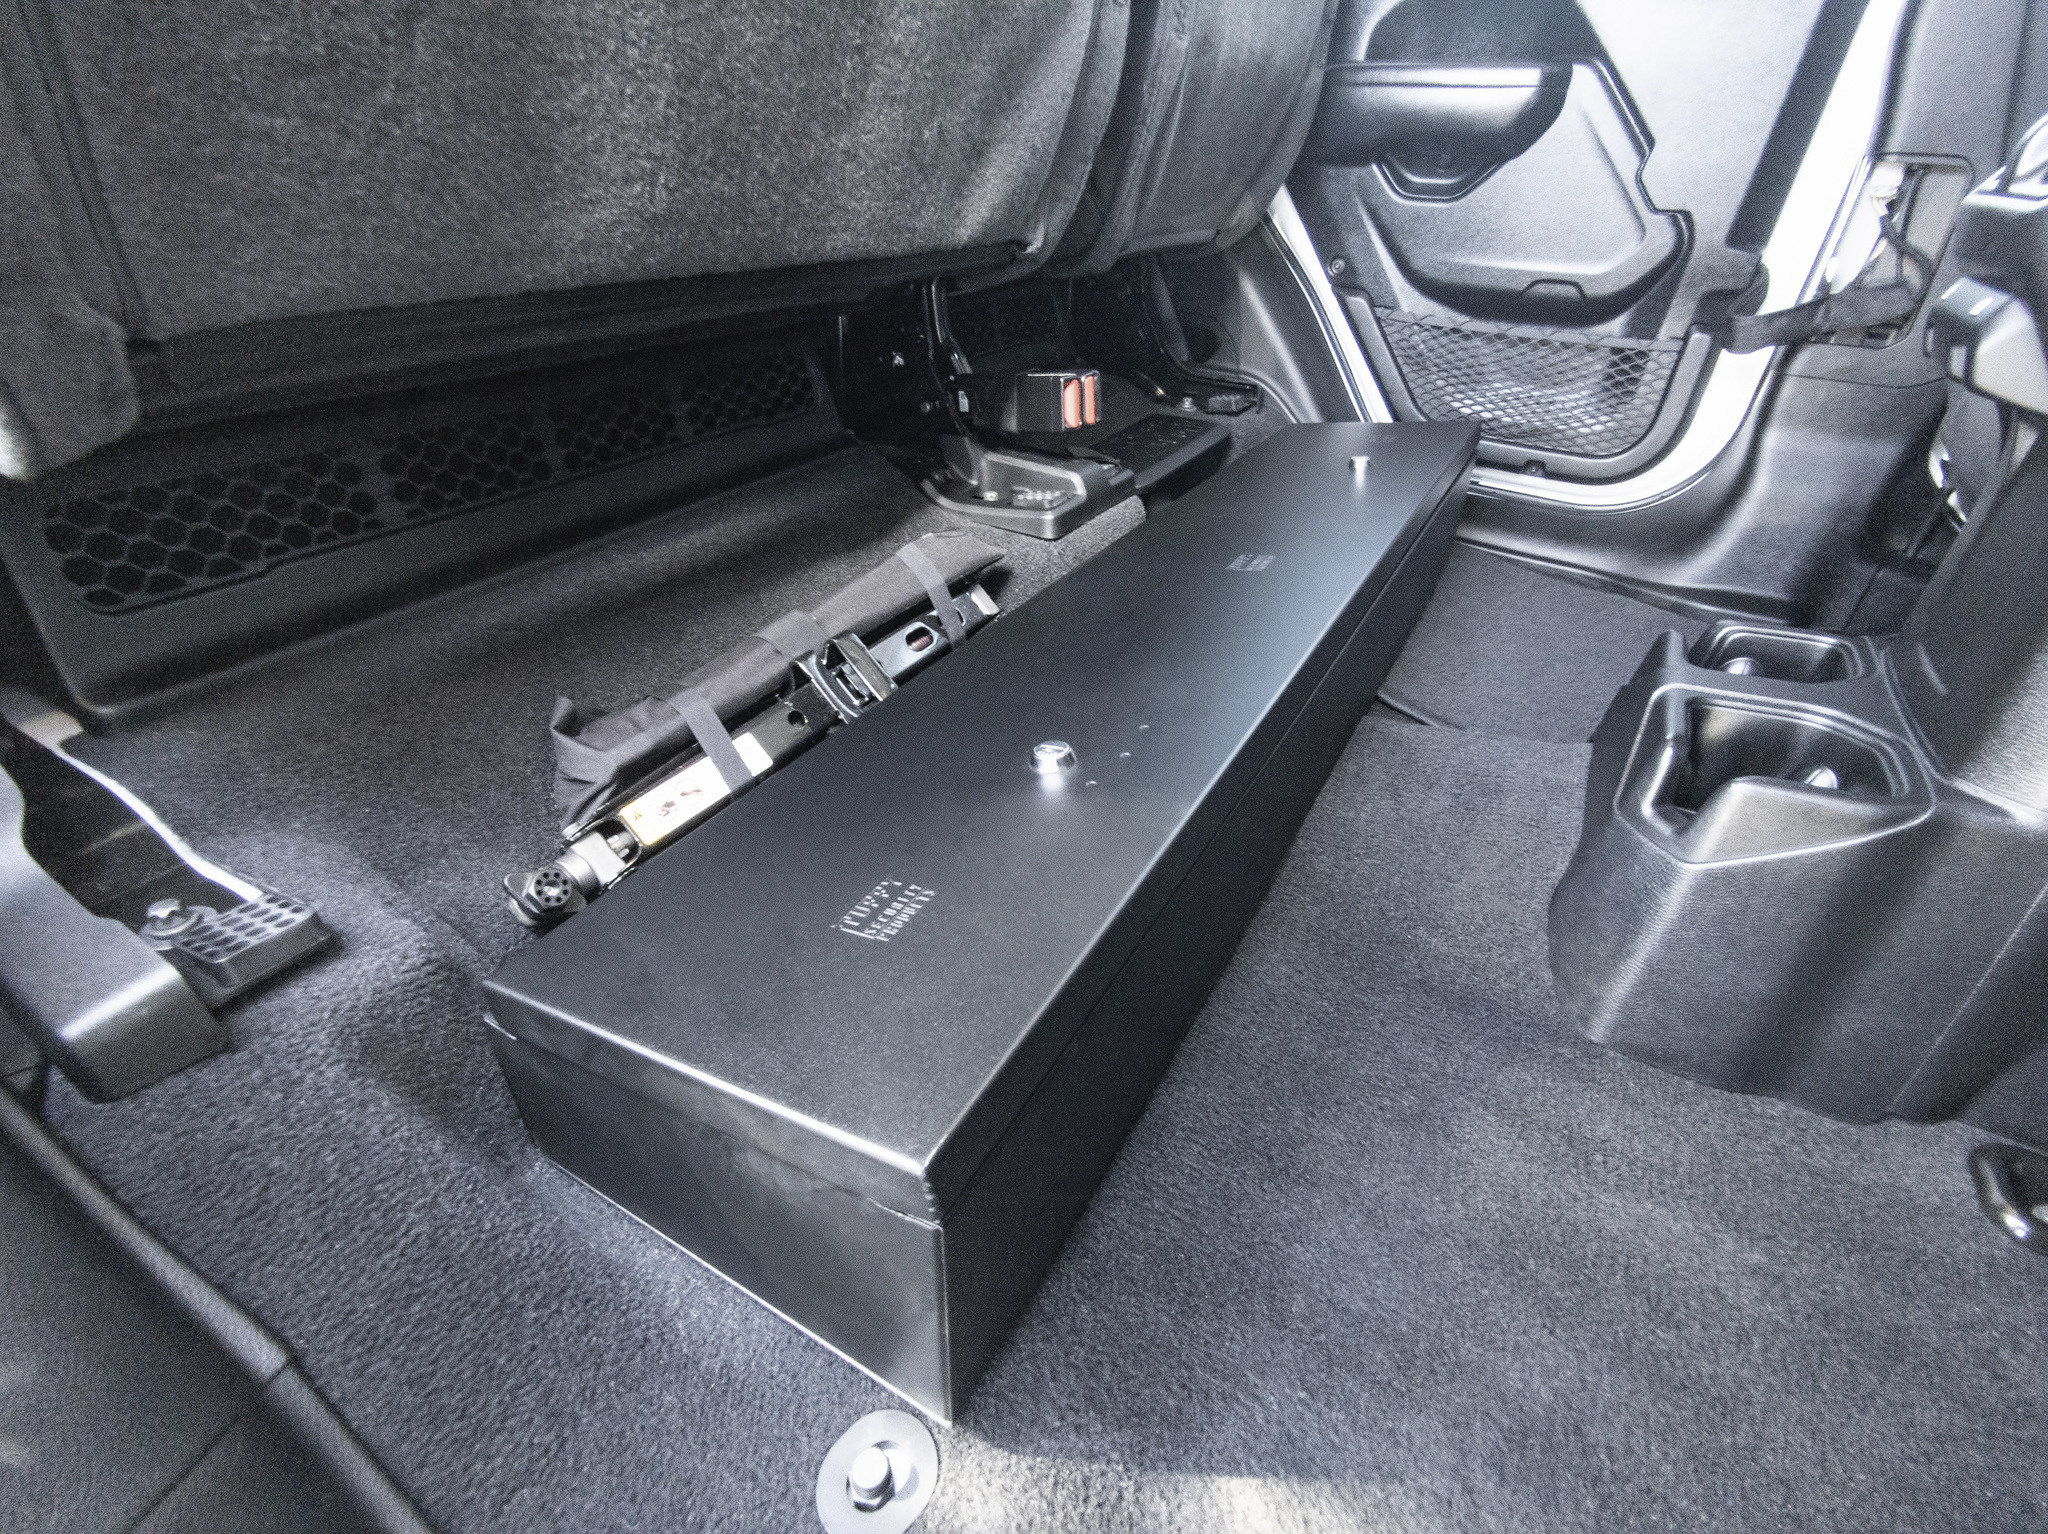 Tuffy Security Products Introduces Full Width Underseat Lockbox for Jeep® Gladiator Models